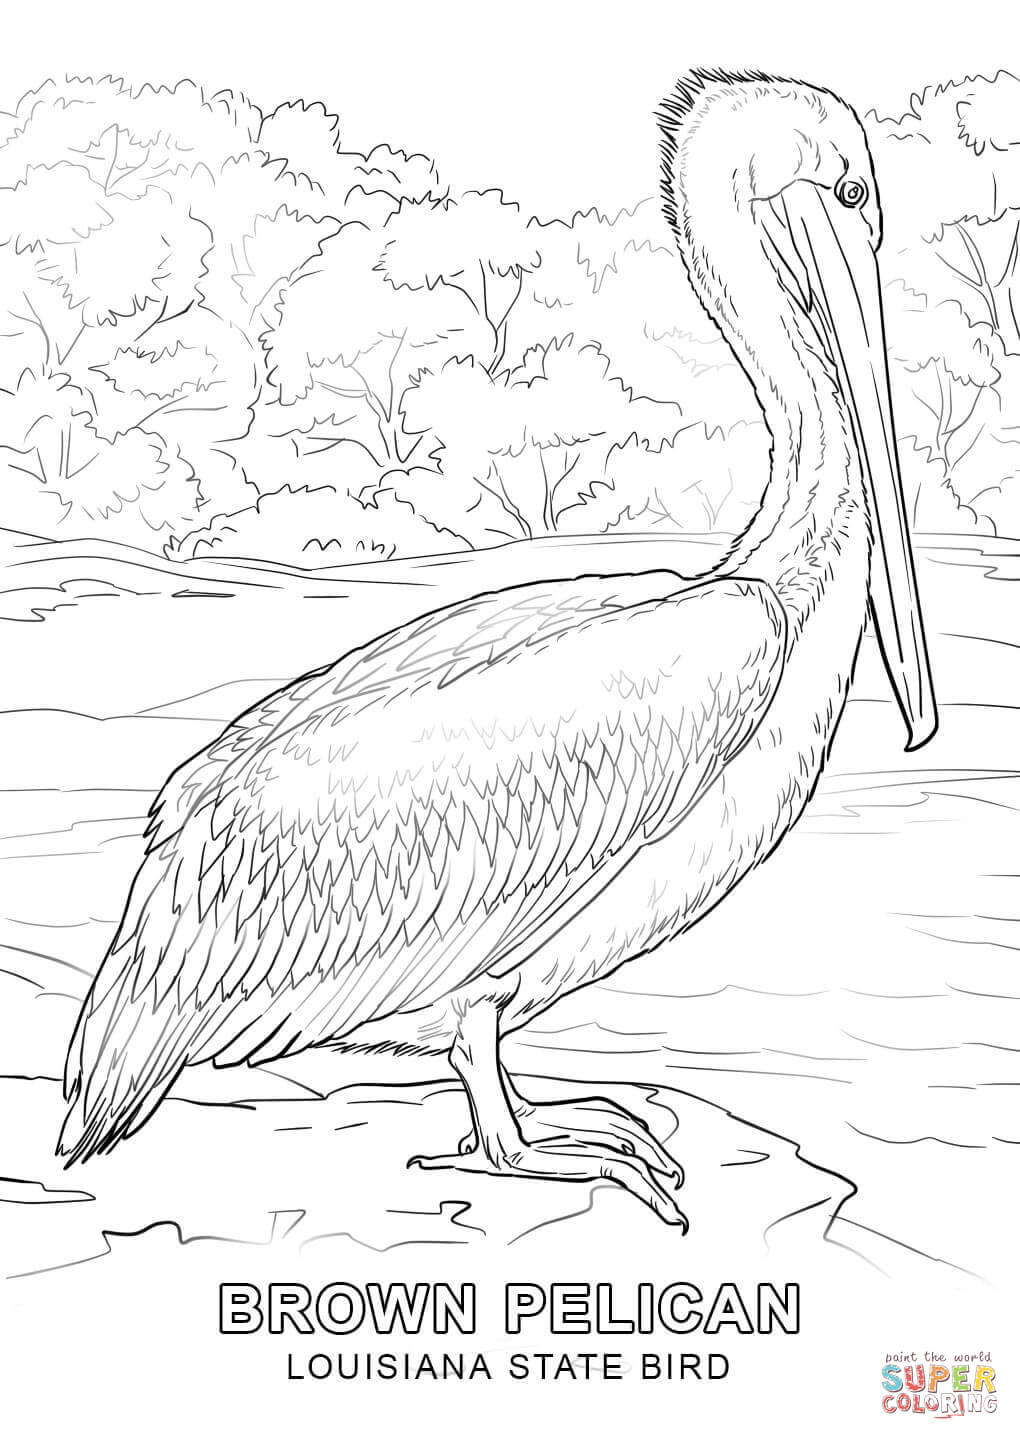 Louisiana State Bird coloring page: Brown Pelican